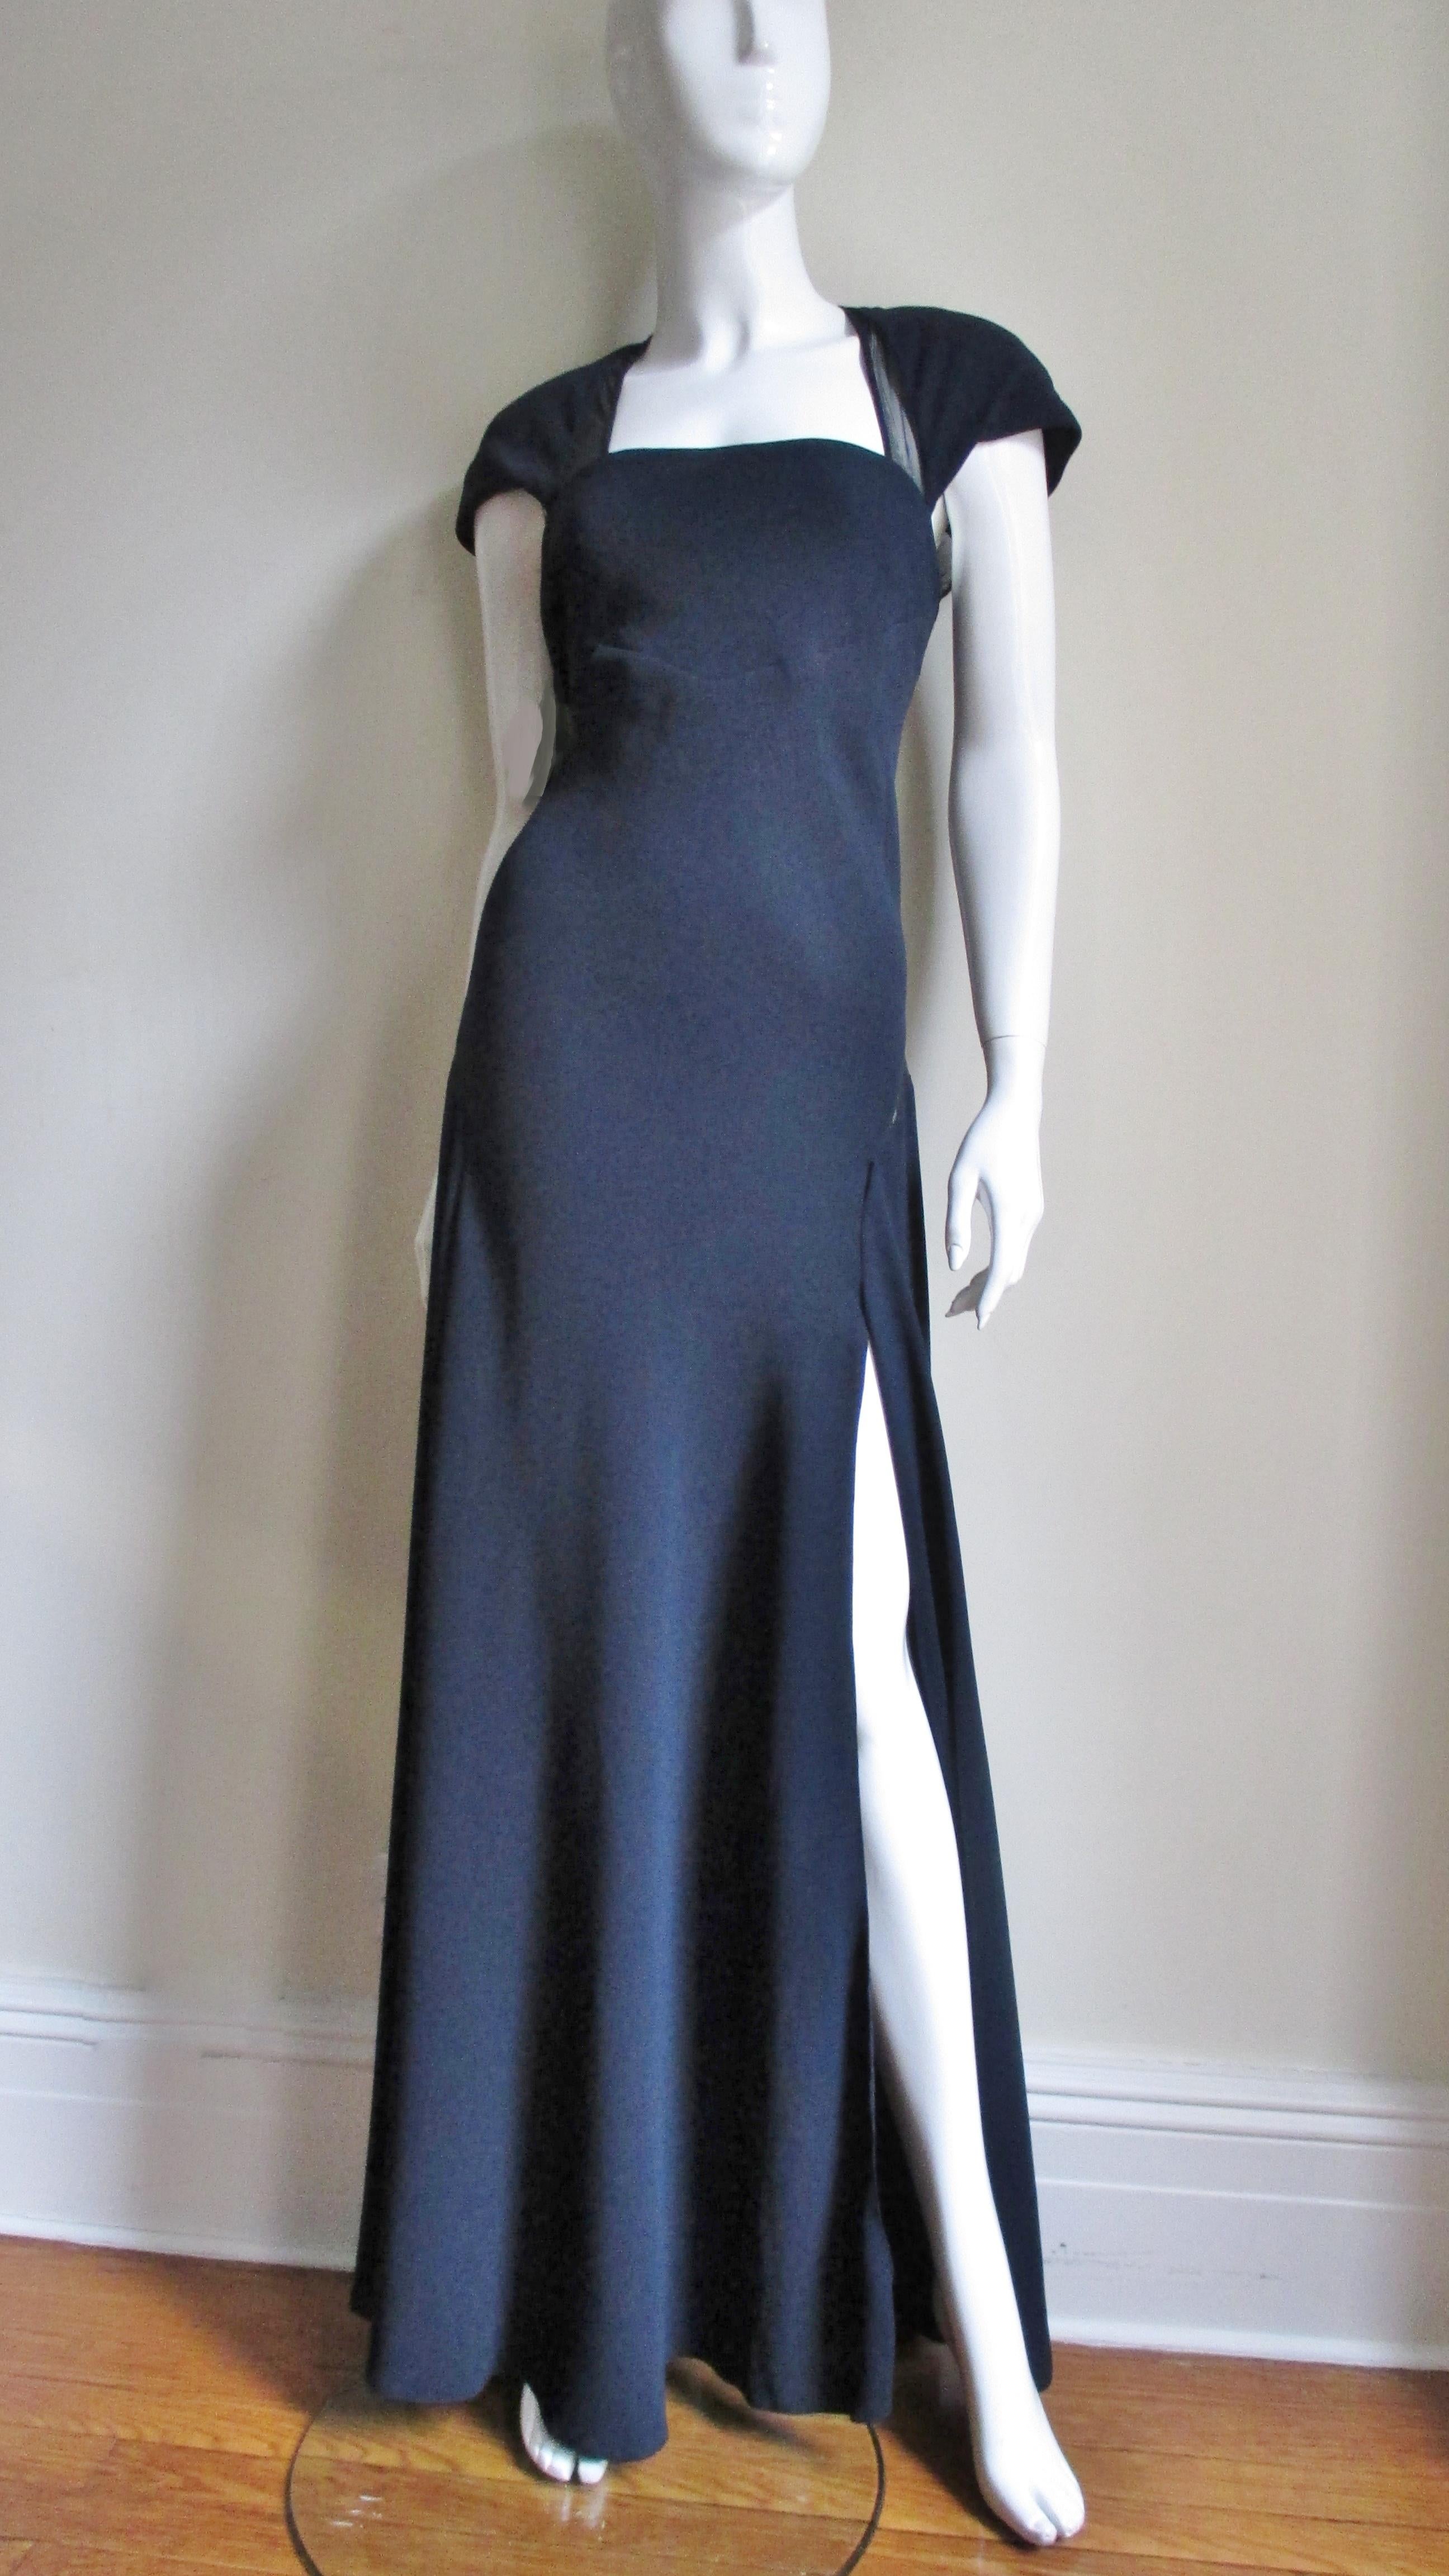 A beautiful navy blue silk gown with strategically placed sheer panels along the sides of the square neckline and back. Jackie Rogers known for her simple shapes and focus on fit has been designing in New York since the 1960's for actresses and